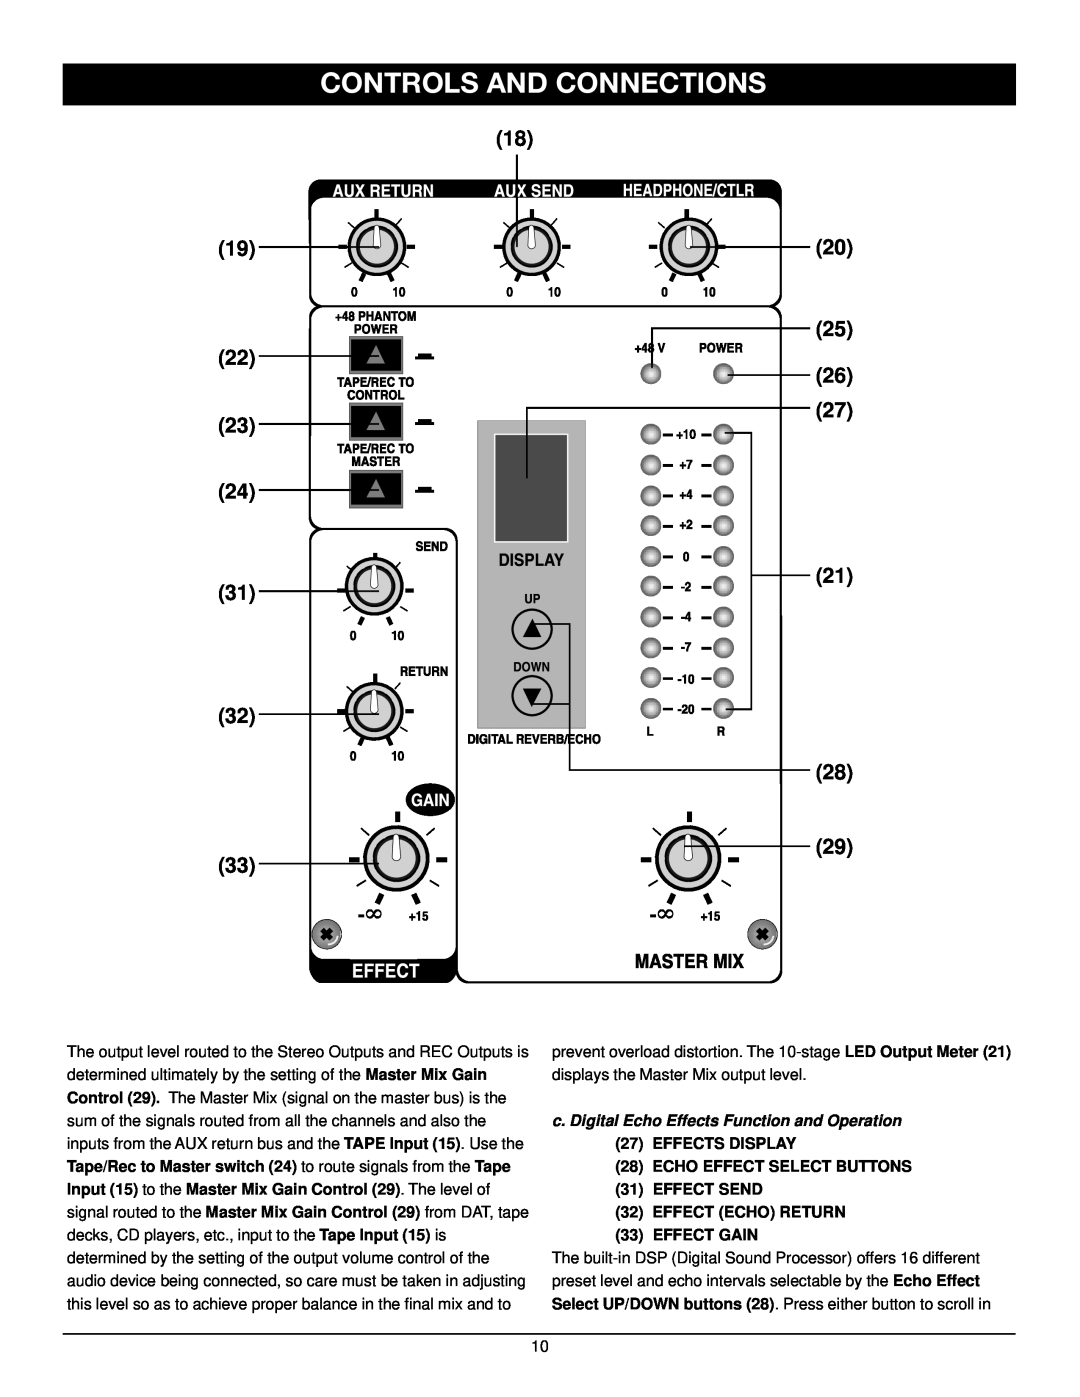 Nady Systems MXE-612 owner manual Controls And Connections, c. Digital Echo Effects Function and Operation 